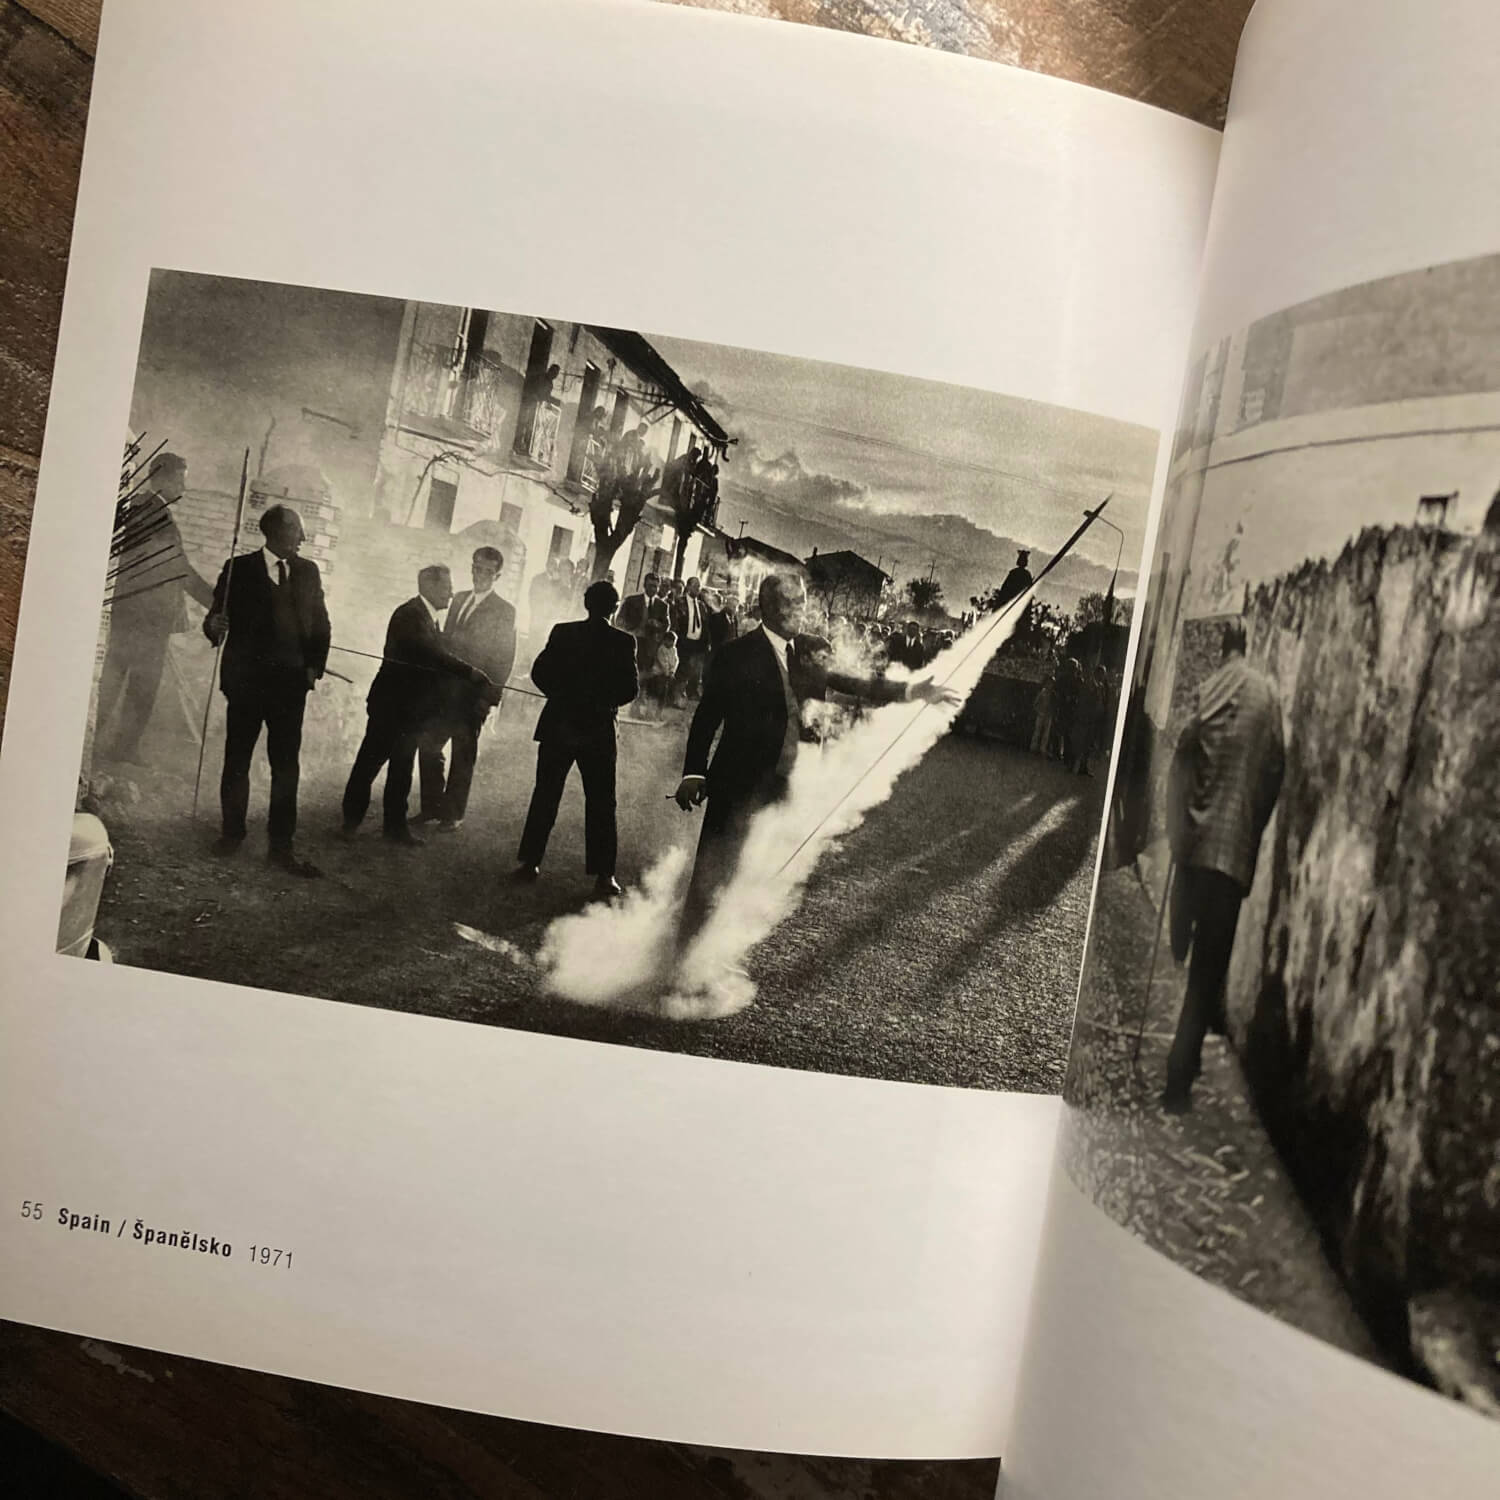 Josef Joudelka, 1971. I bought this book at a flea market for around EUR5, and it covers Koudelka's entire photgraphic career with good print quality.